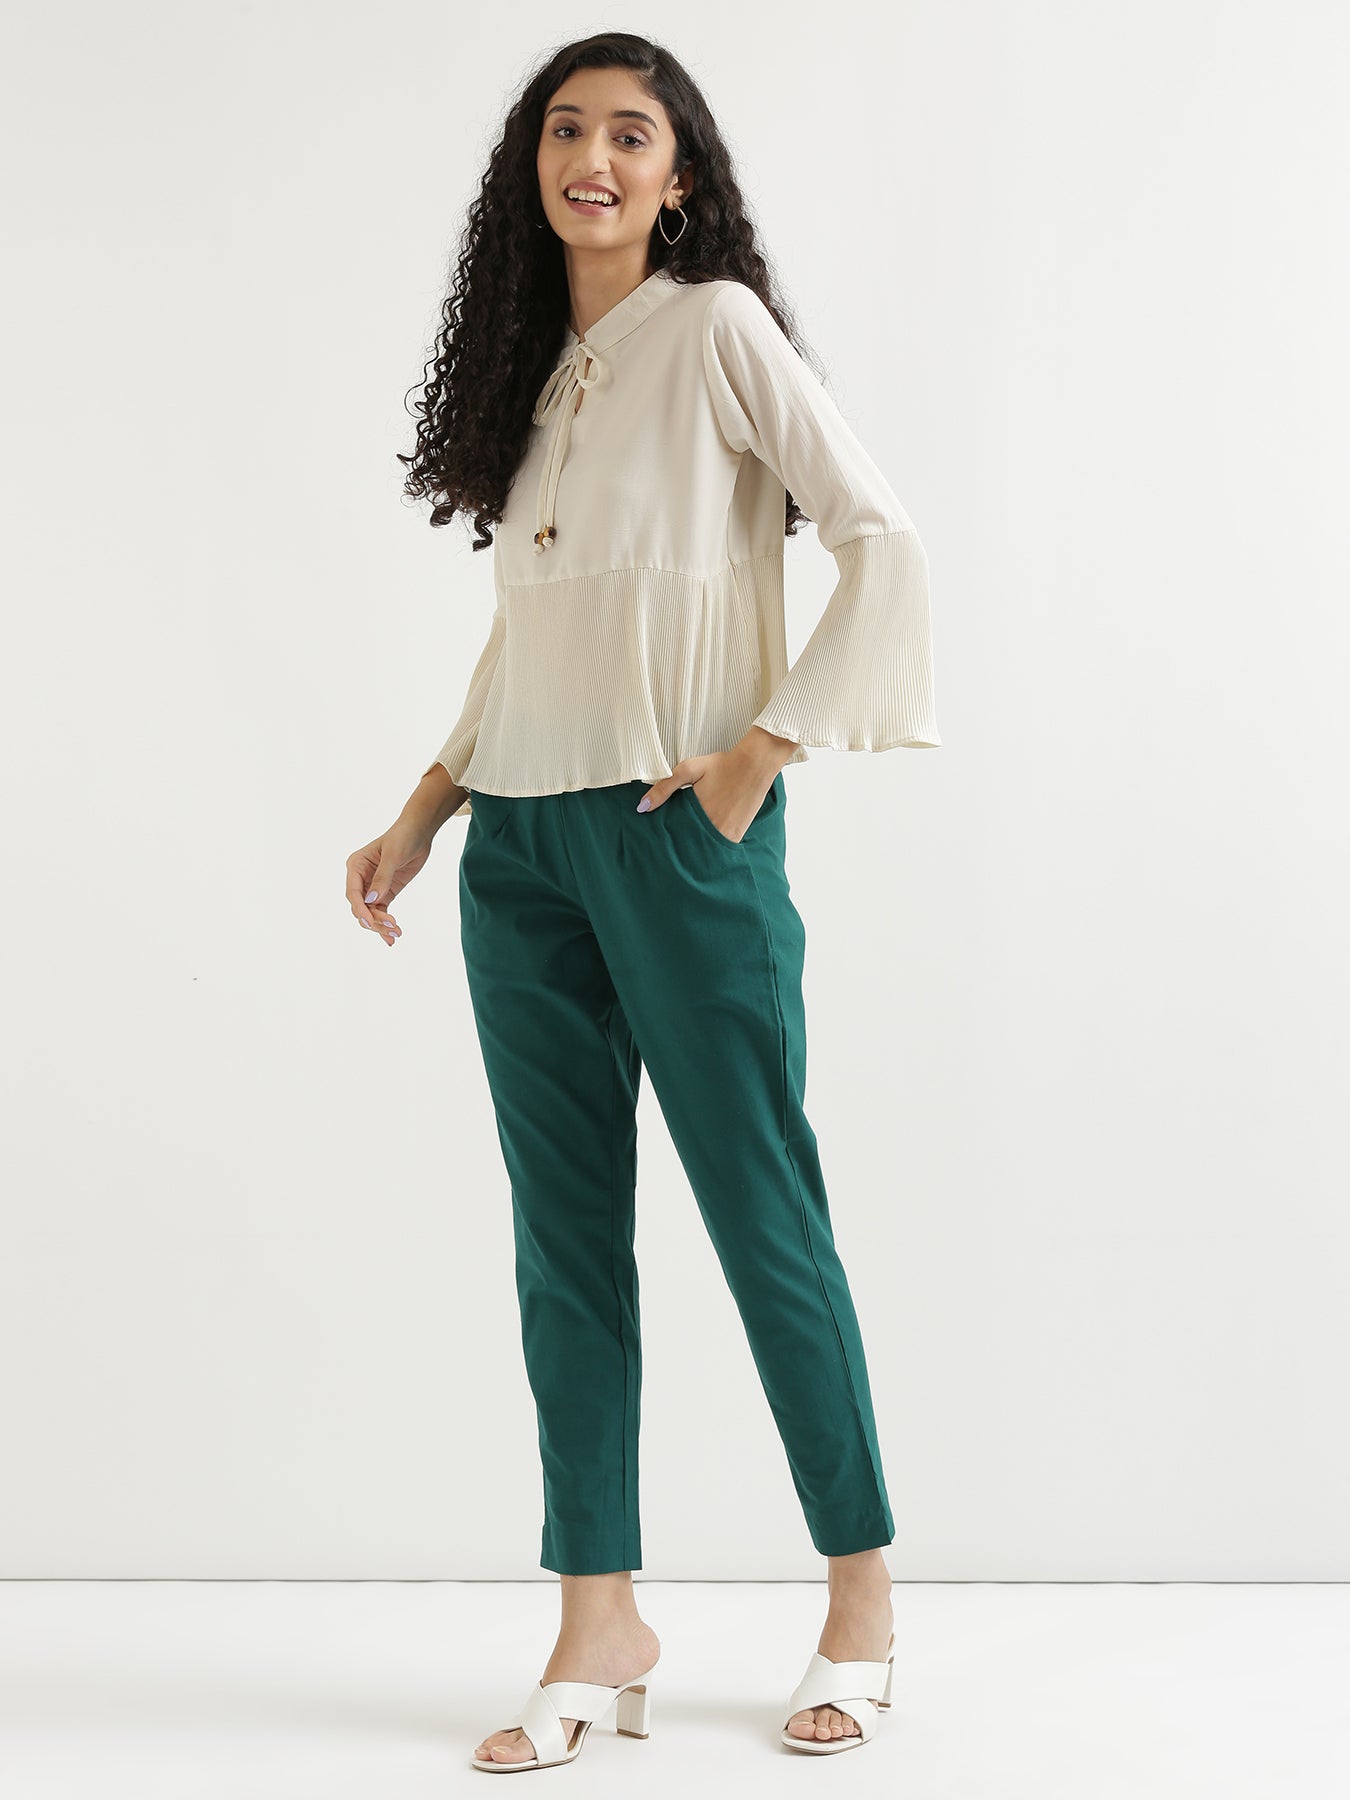 SASSAFRAS Olive Green Solid Shimmer Puff Sleeves Peplum Top Price in India,  Full Specifications & Offers | DTashion.com